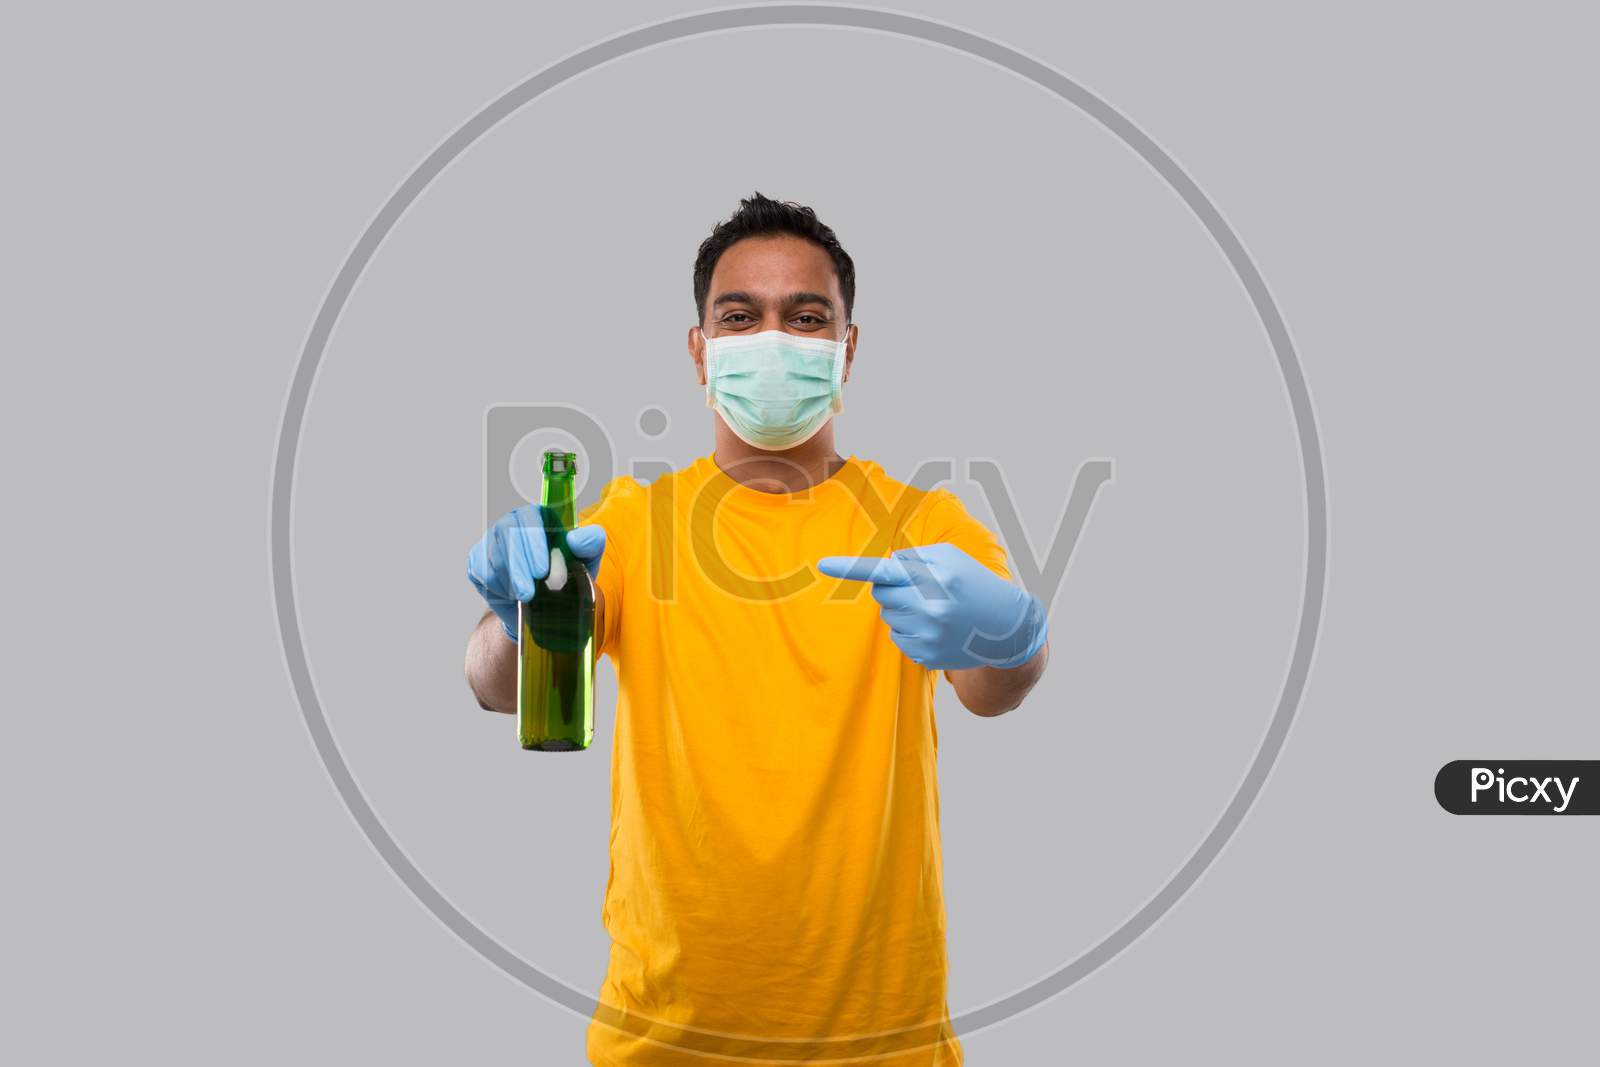 Indian Man Pointing At Beer Bottle Wearing Medical Mask And Gloves Isolated.